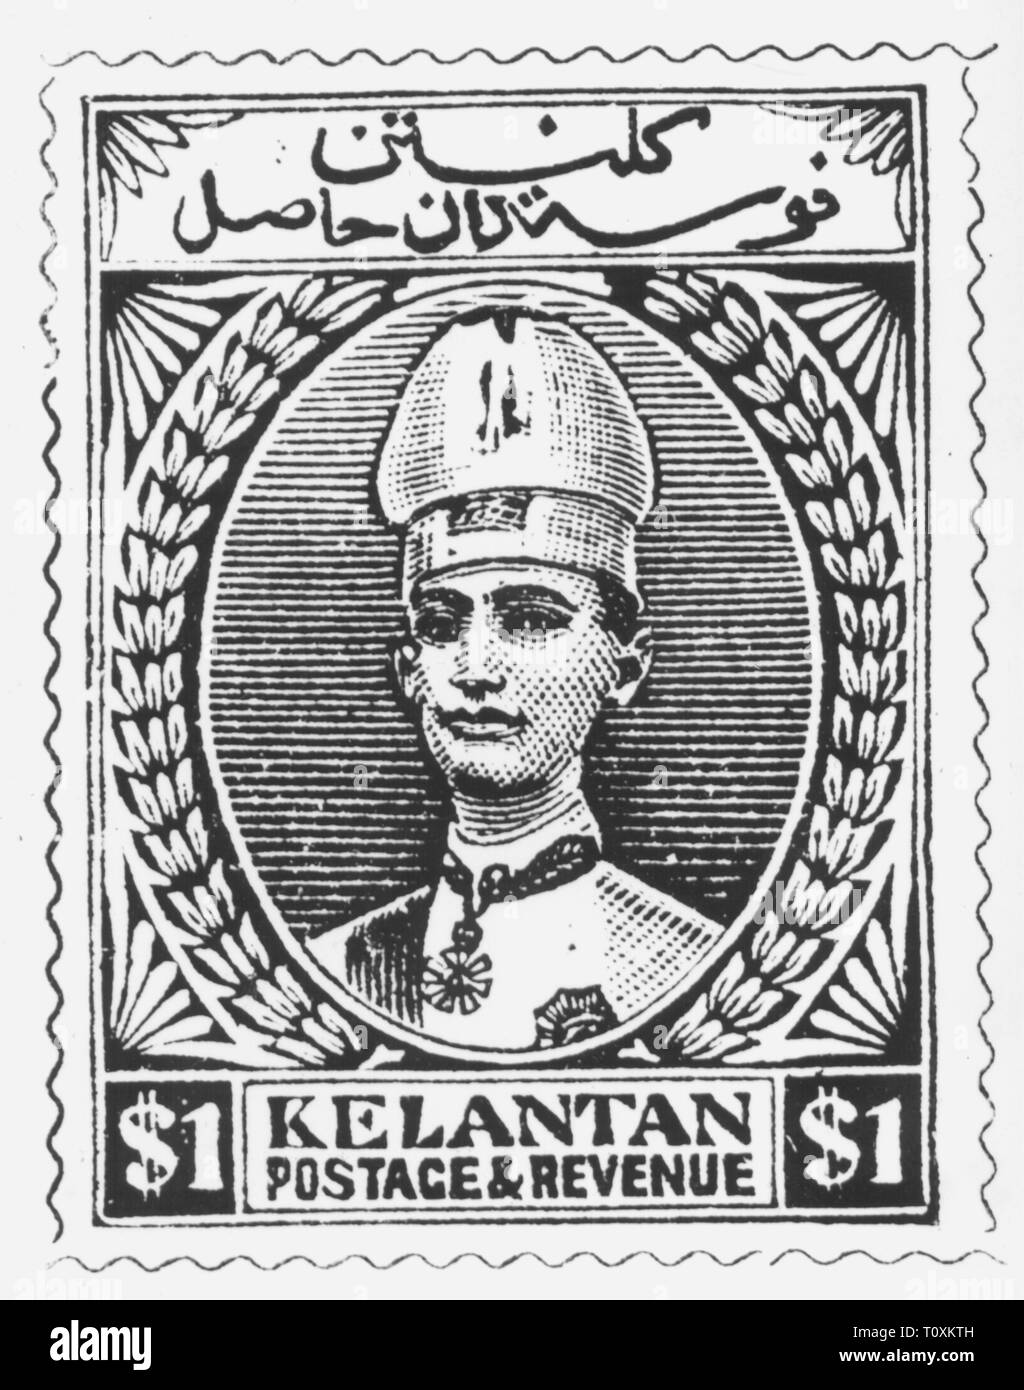 mail, postage stamps, Malaysia, sultanate Kelantan, 1 dollar postage and revenue stamp, portrait of Sultan Ismail, date of issue: 1928, Additional-Rights-Clearance-Info-Not-Available Stock Photo